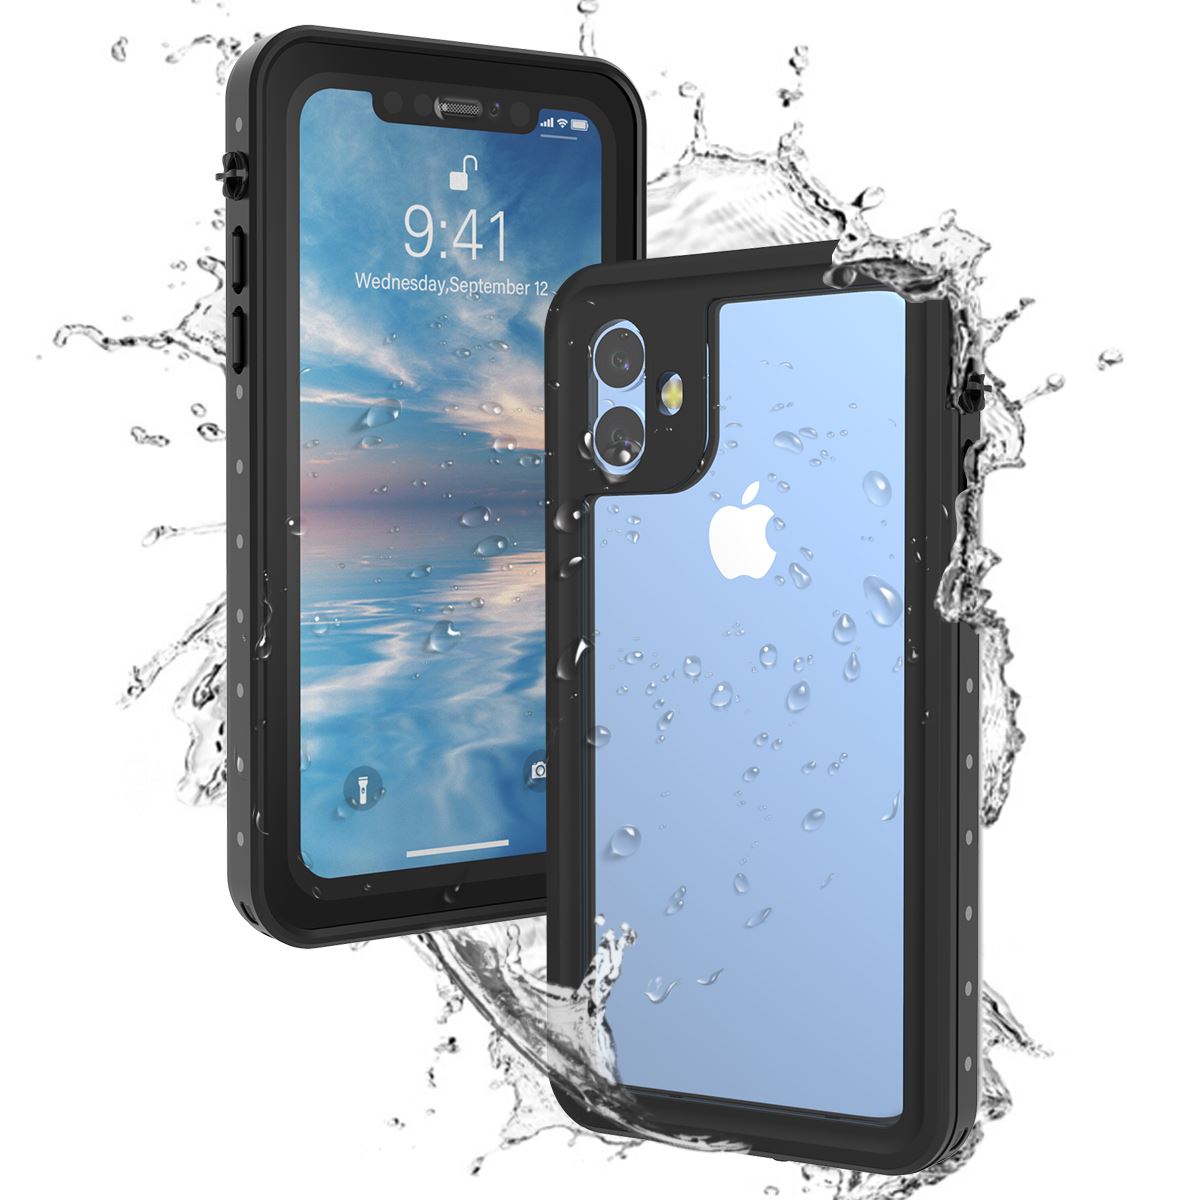 For iPhone 11 pro X XS Max XR Case IP68 Waterproof 360 Degree Protection Sports Cover for iPhone 7 8 SE 2020 Case Underwater